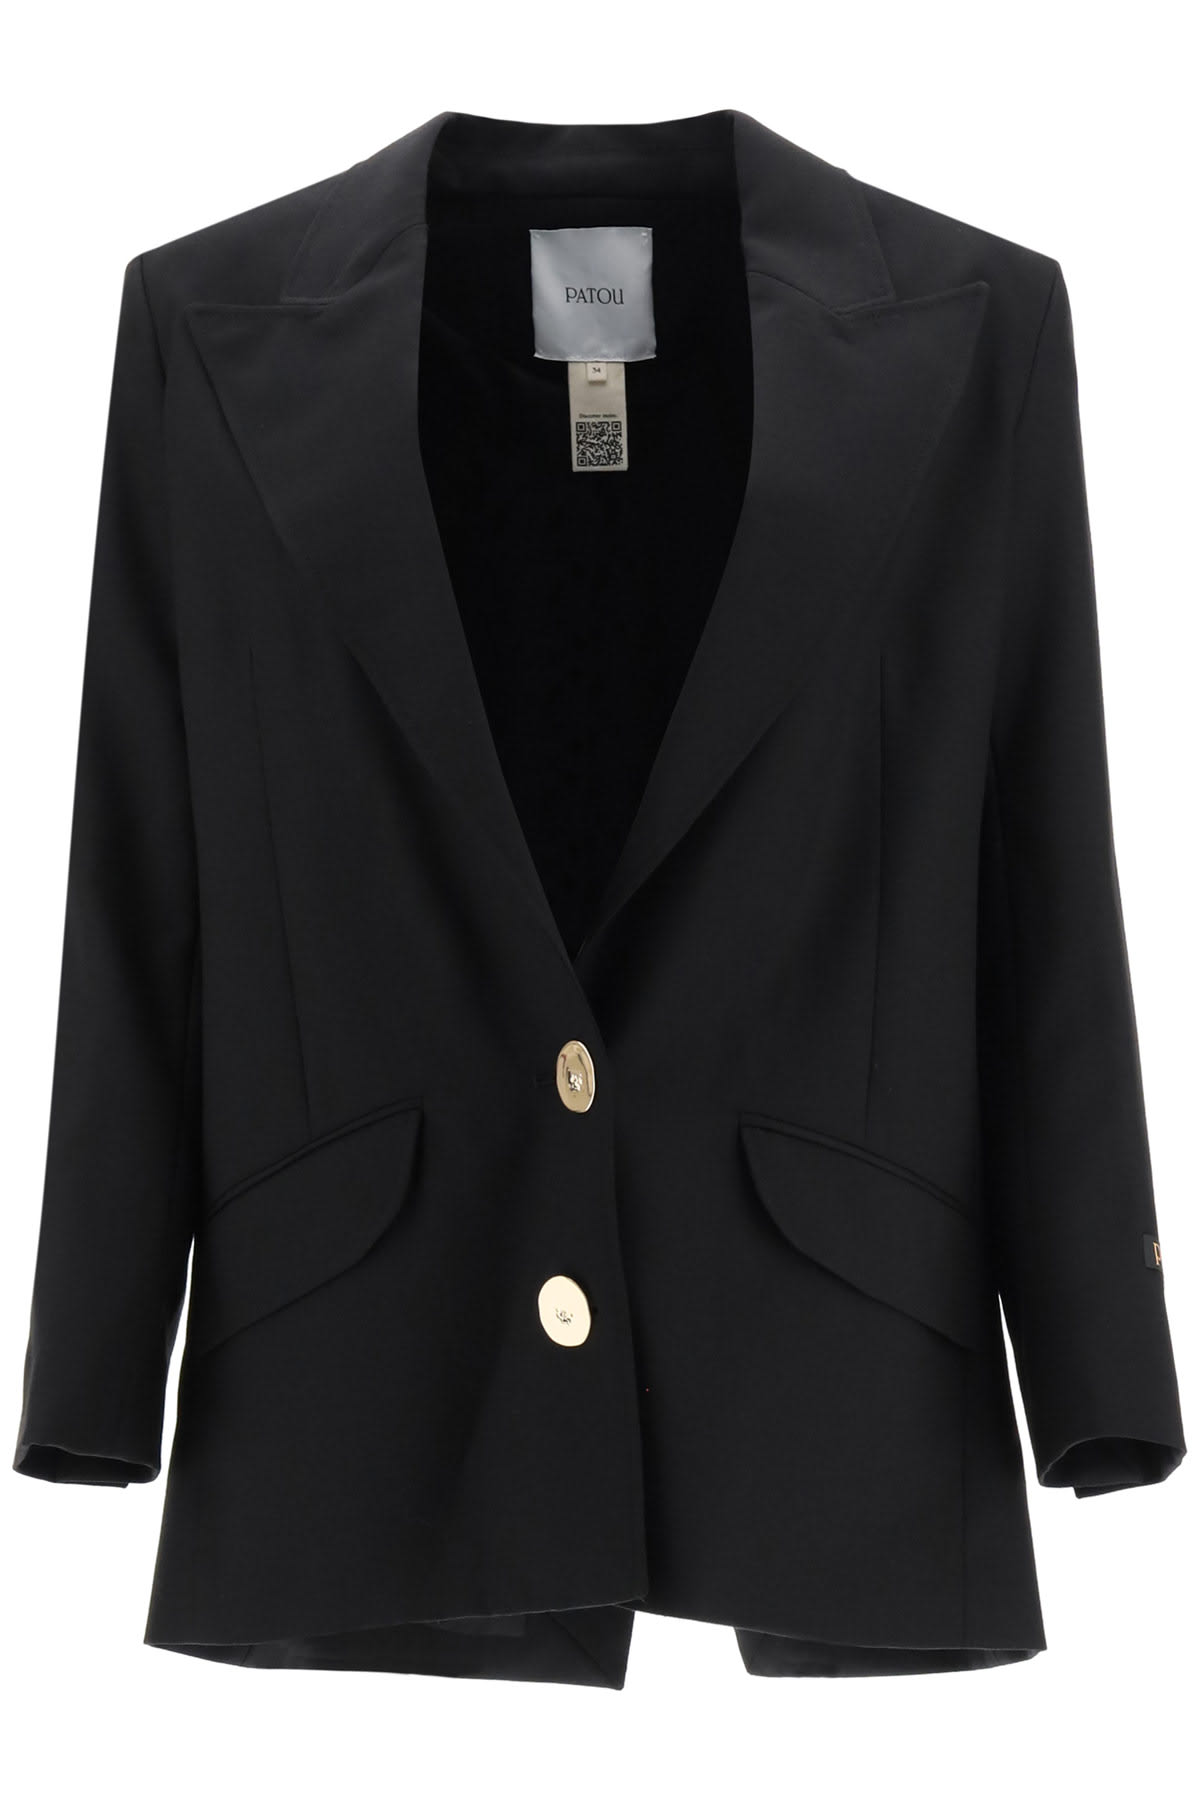 Patou Wool Jacket With Jewel Buttons